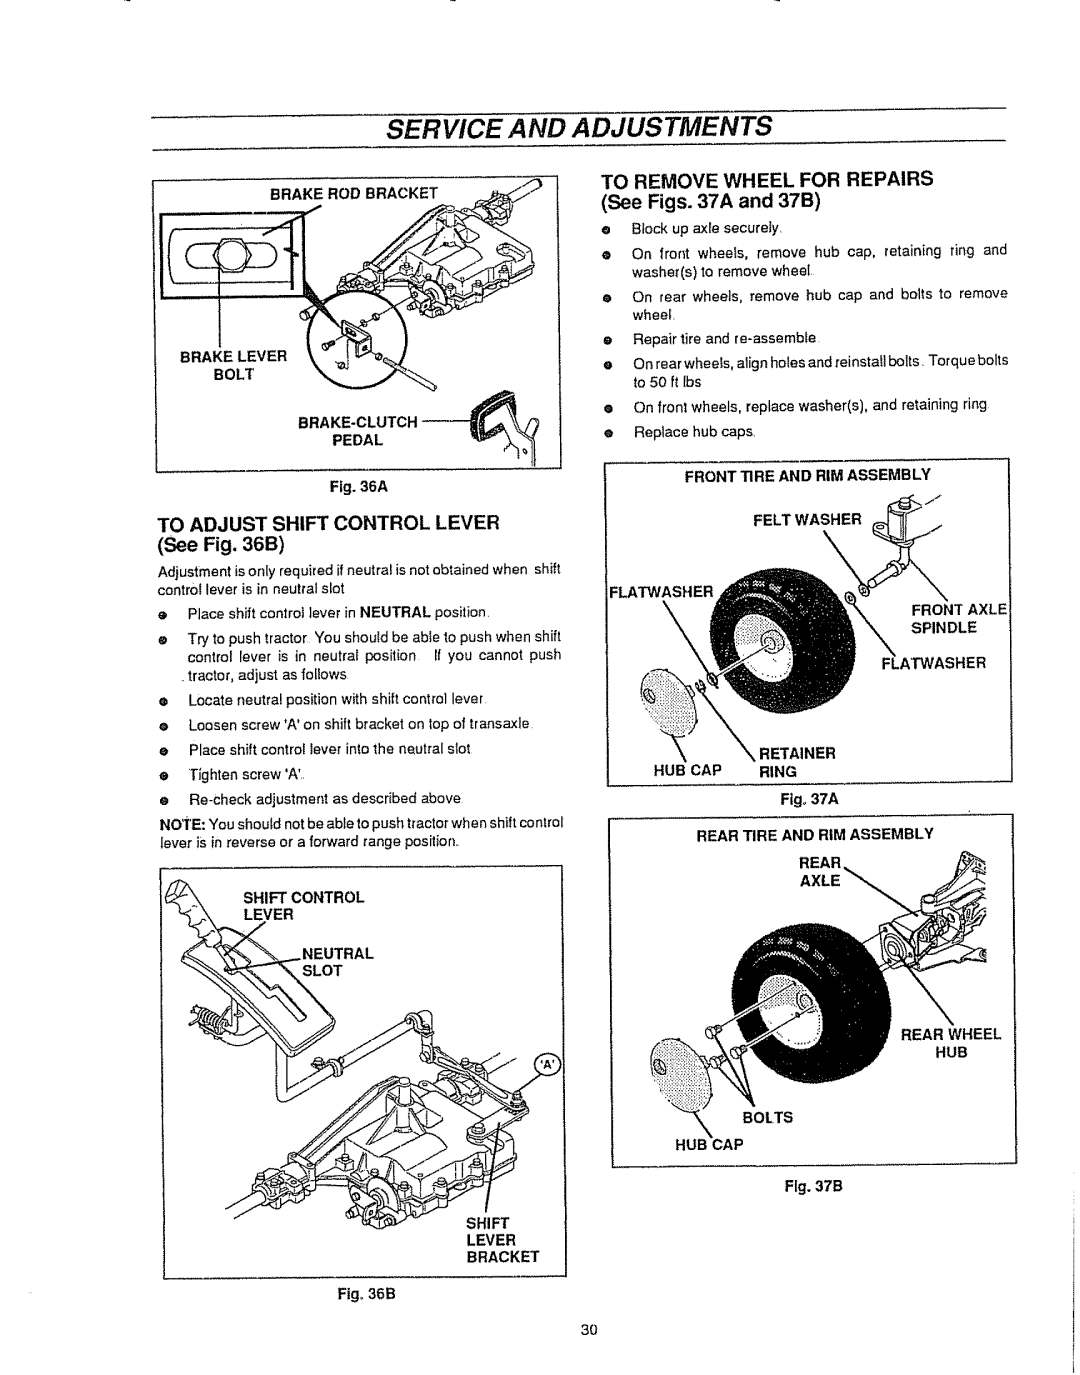 Sears 536.25587 owner manual Service And Adjustments, TO REMOVE WHEEL FOR REPAIRS See Figs. 37A and 37B, Bracket 